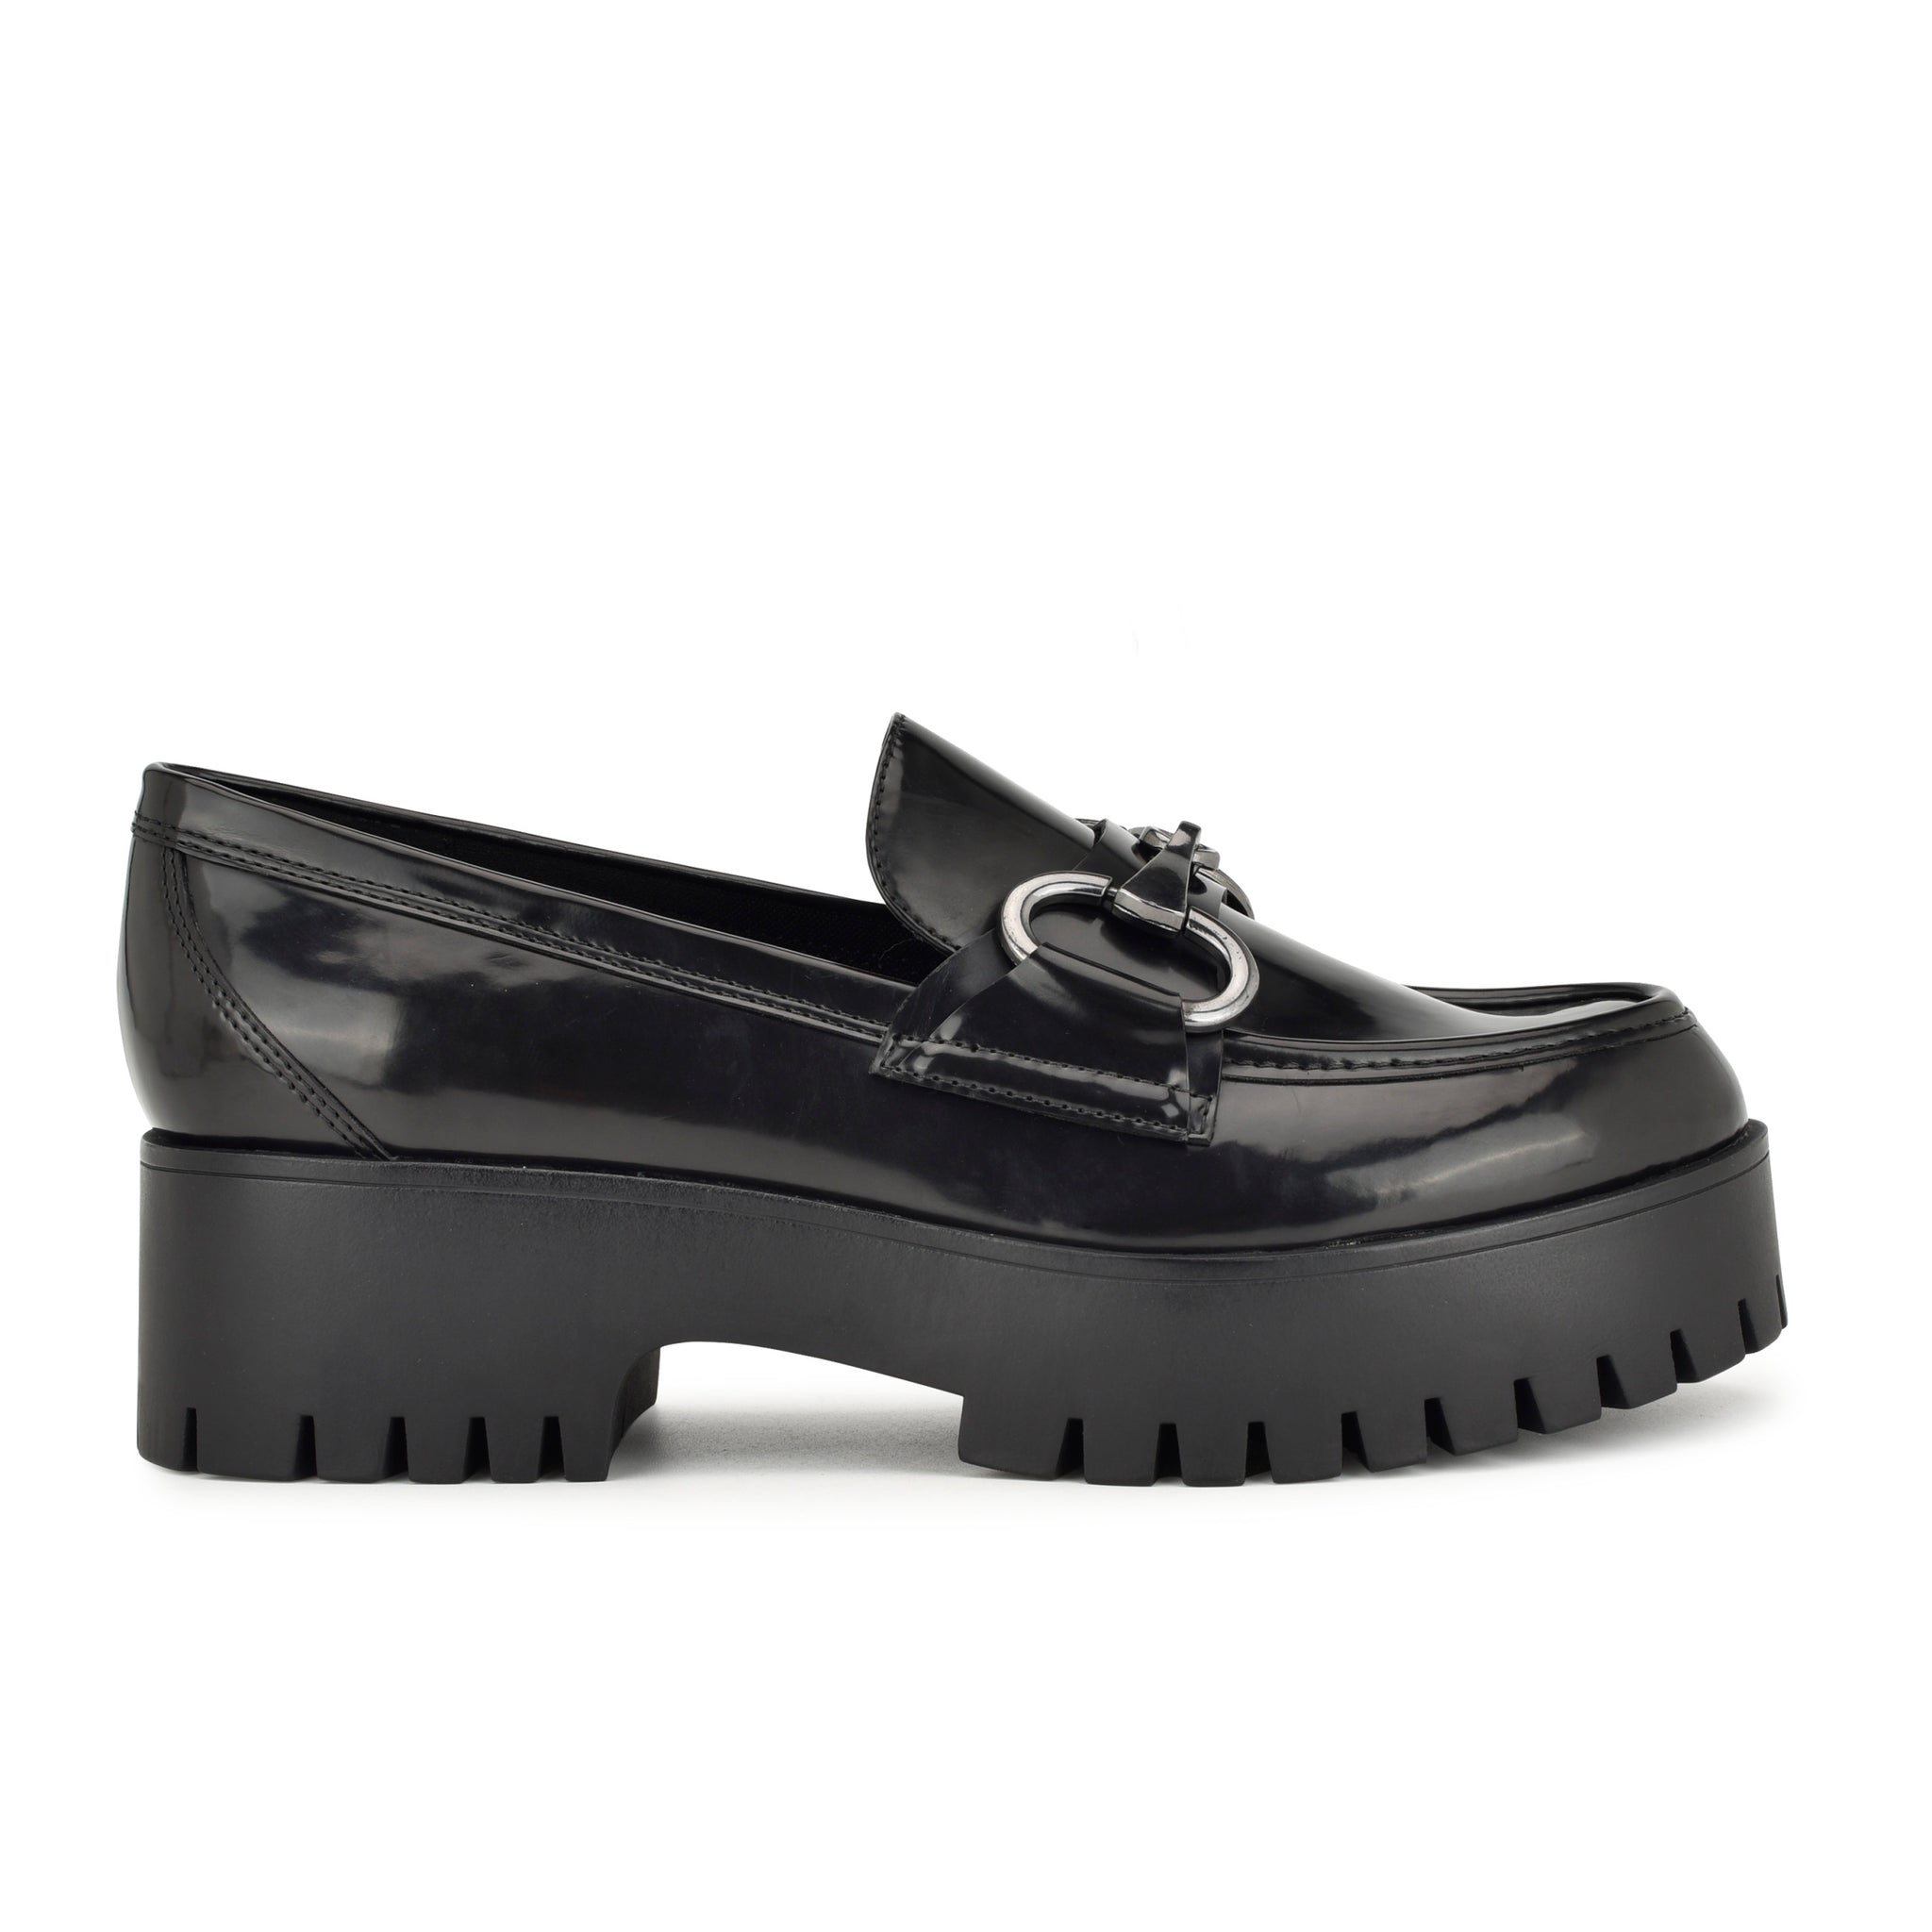 Kpacie Casual Moc Loafers - Nine West